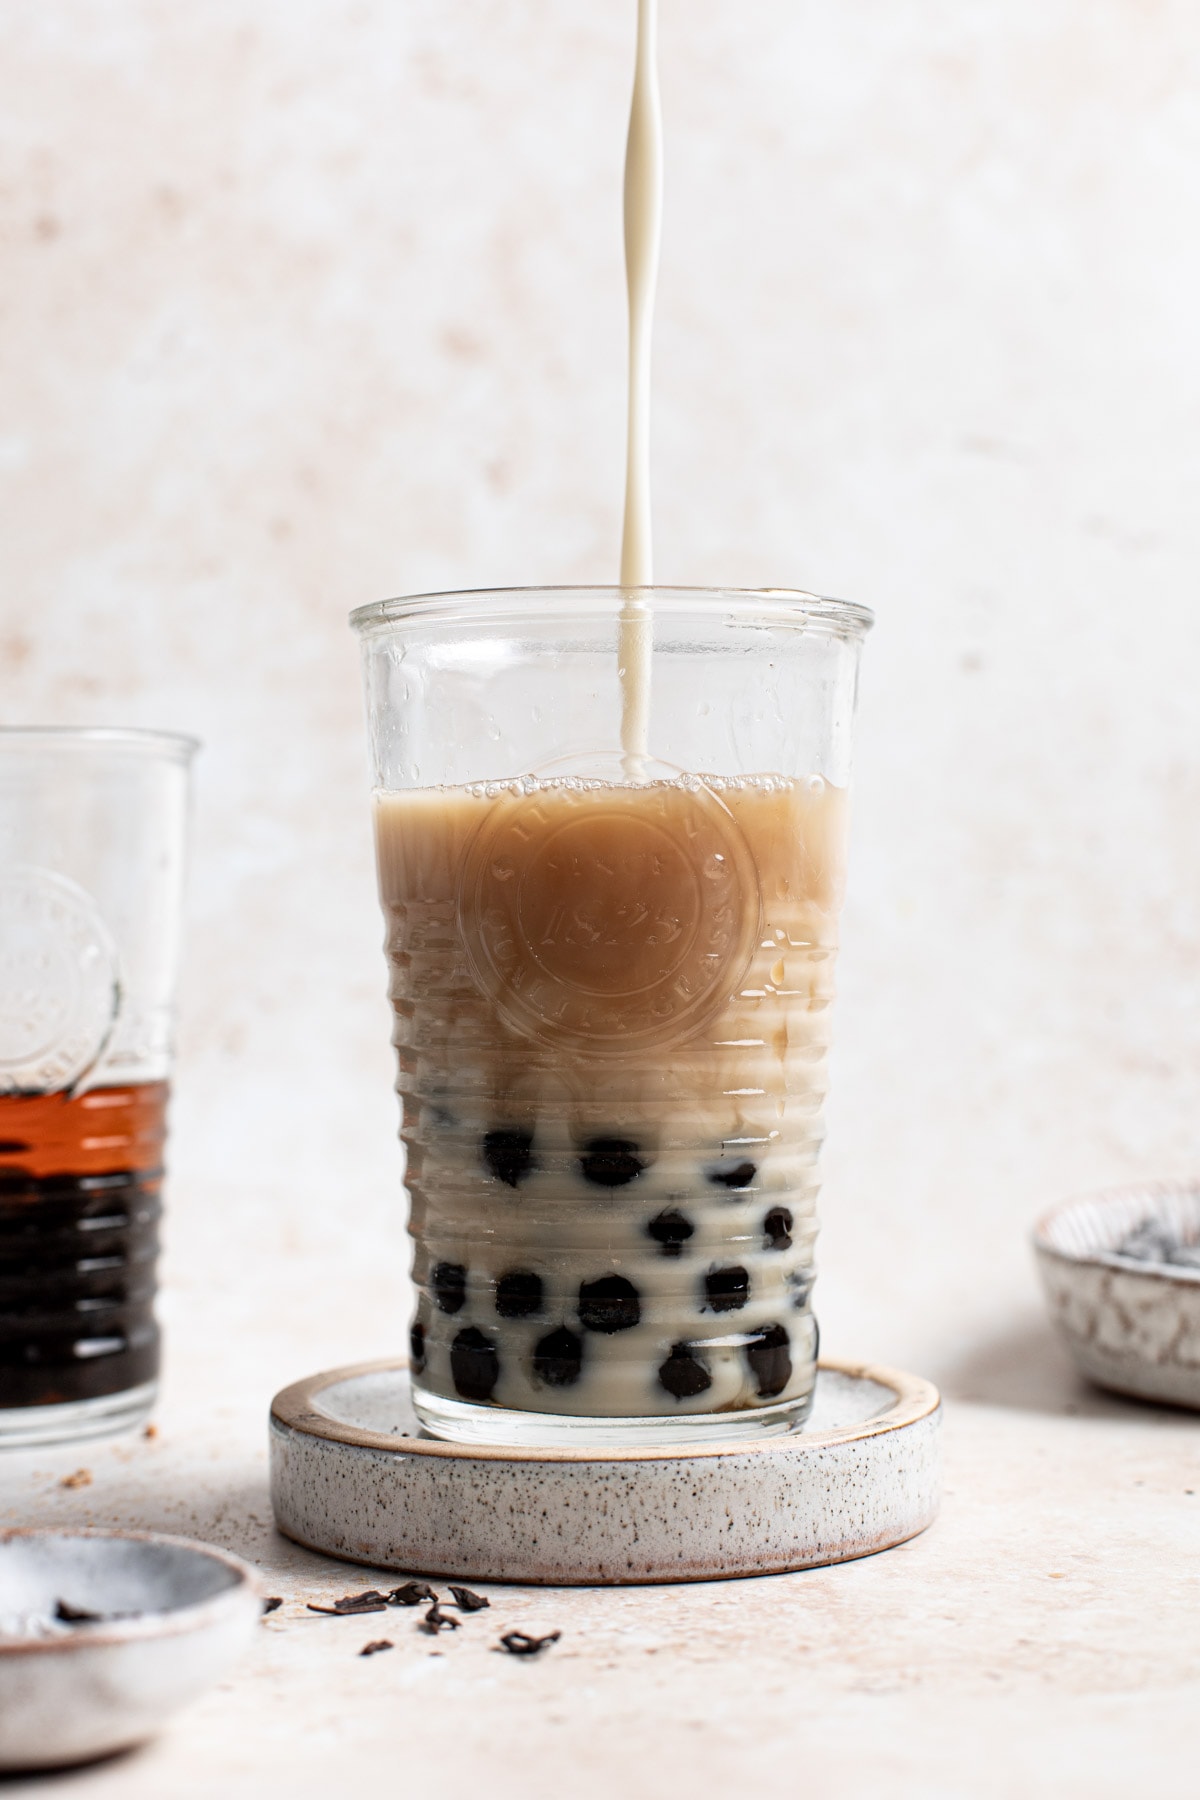 Milk being poured into a ribbed glass filled with boba pearls & tea.